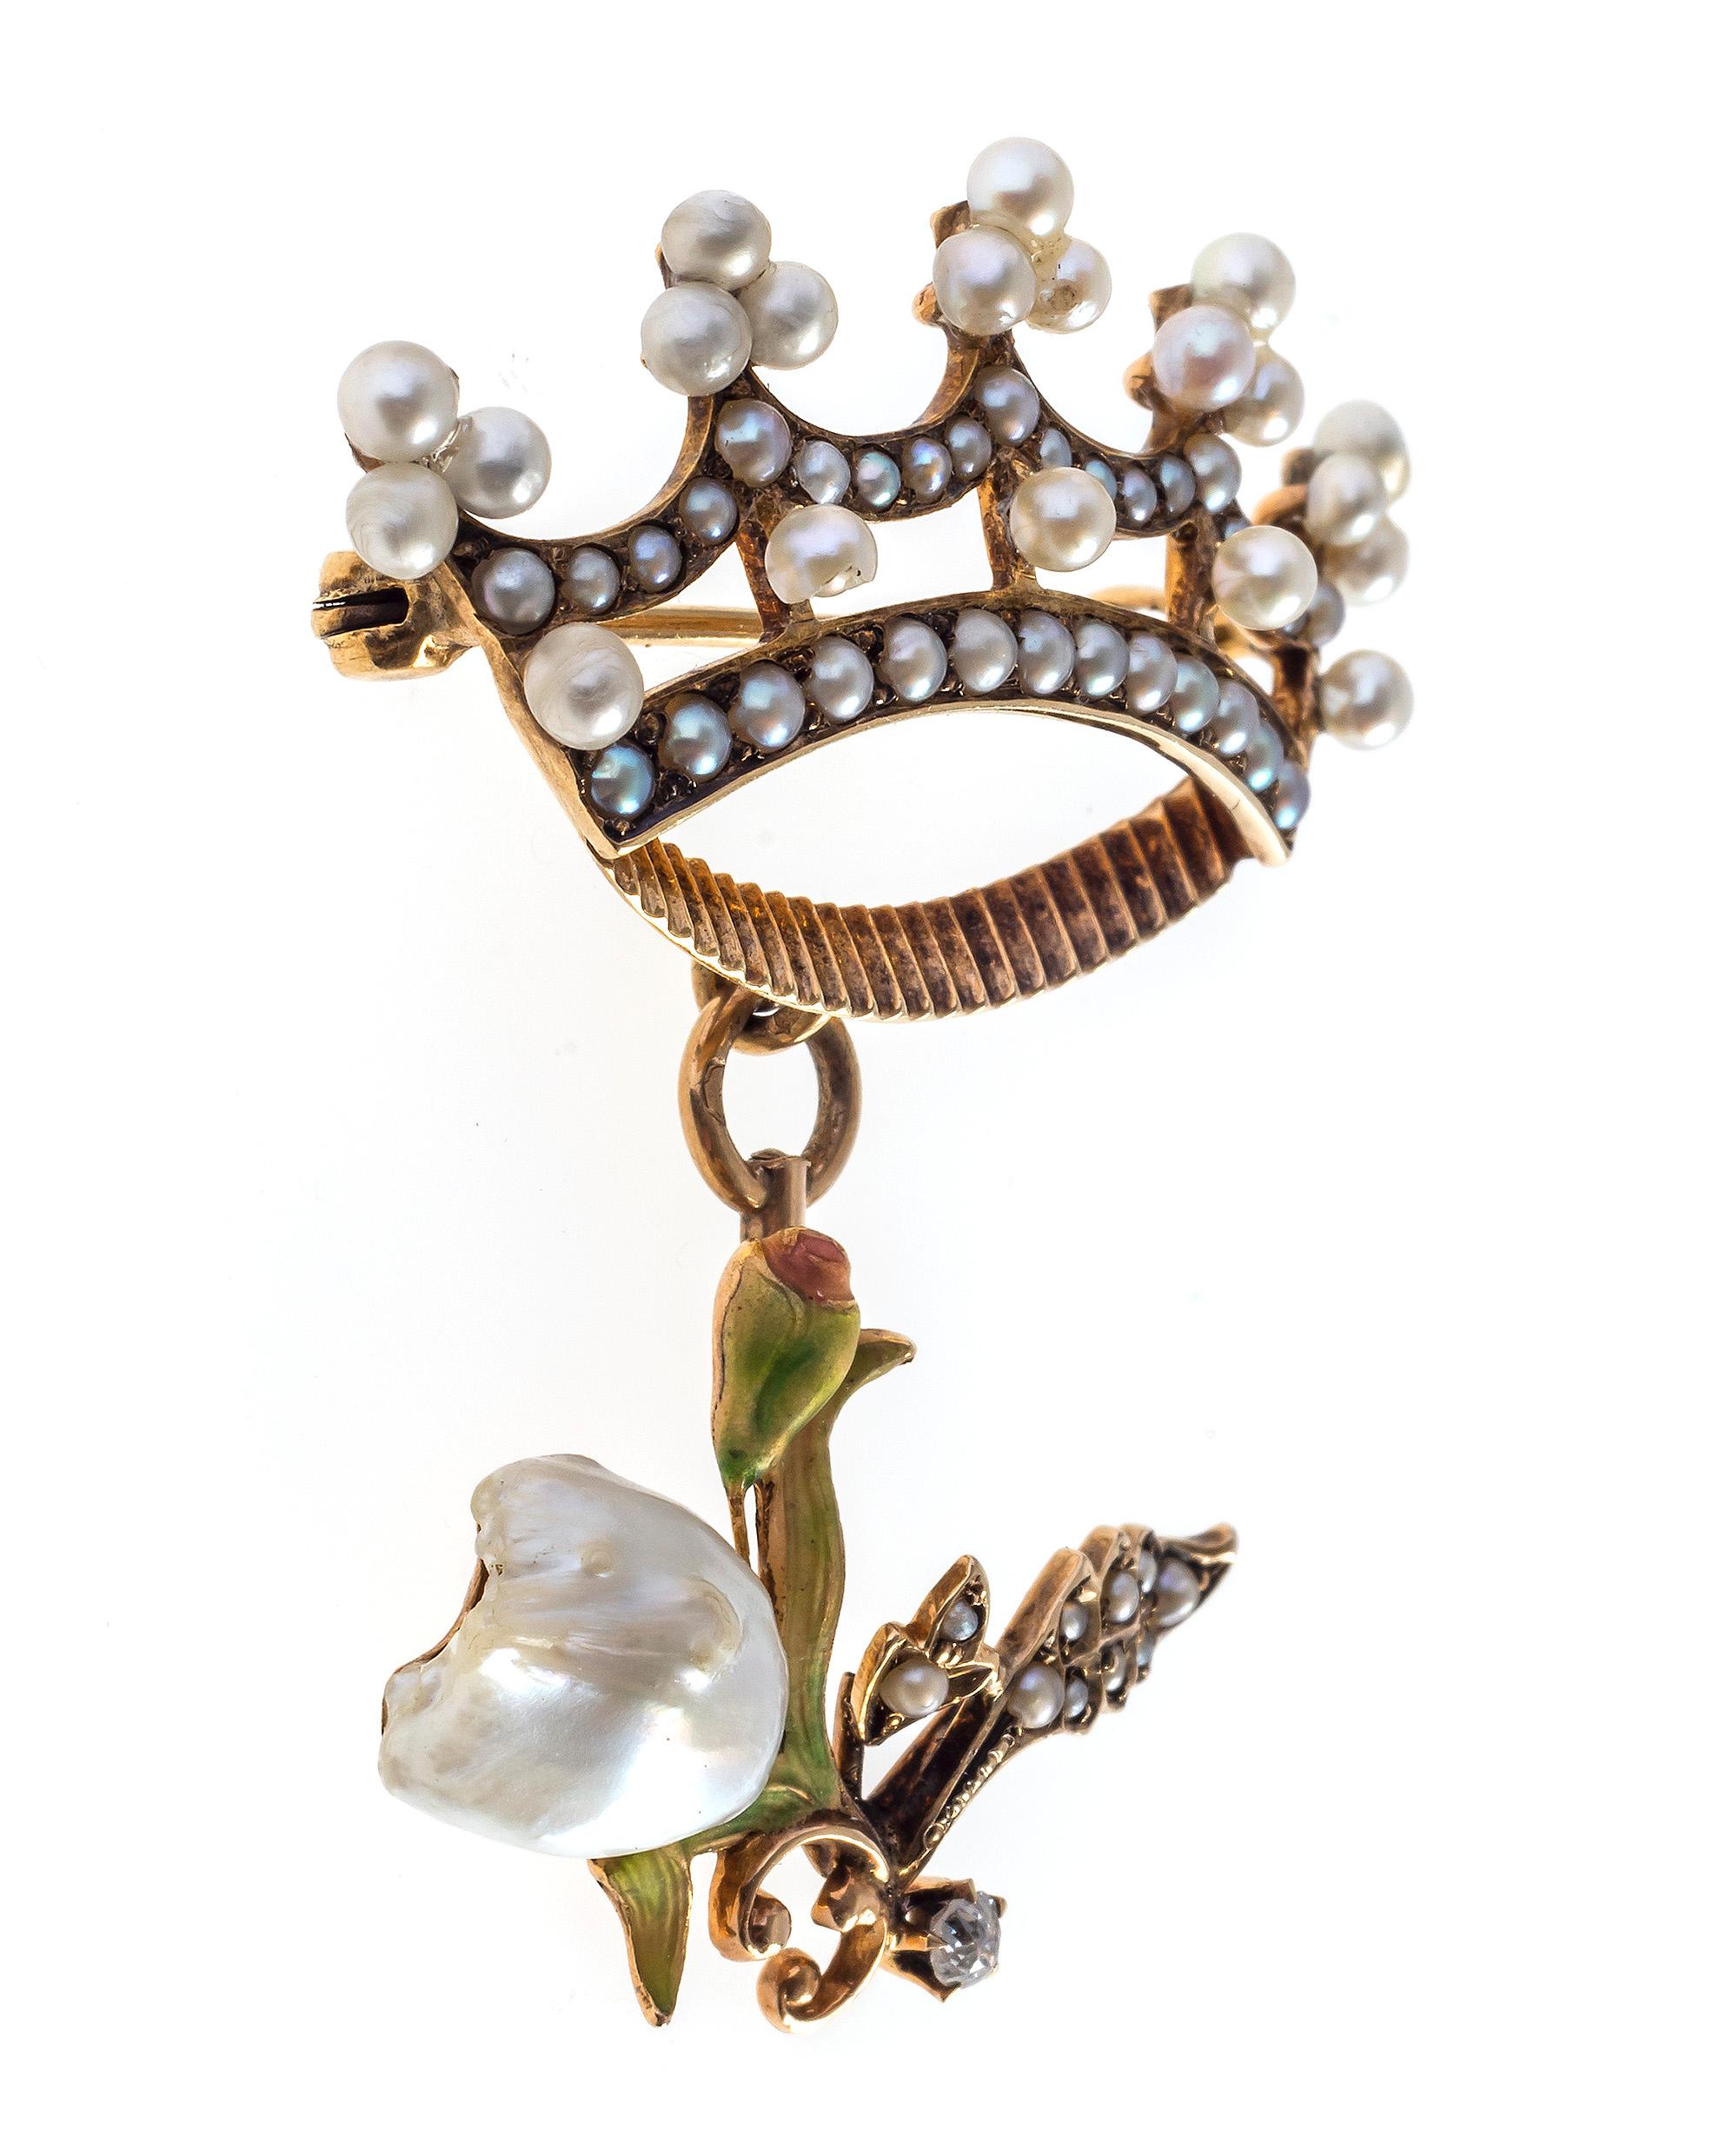 A crown set with fine oriental pearls is mounted as a brooch from which a finely modelled tulip is suspended. A natural baroque pearl, representing the head of the tulip, is surrounded by fine leaves and a flower bud decorated with polychrome